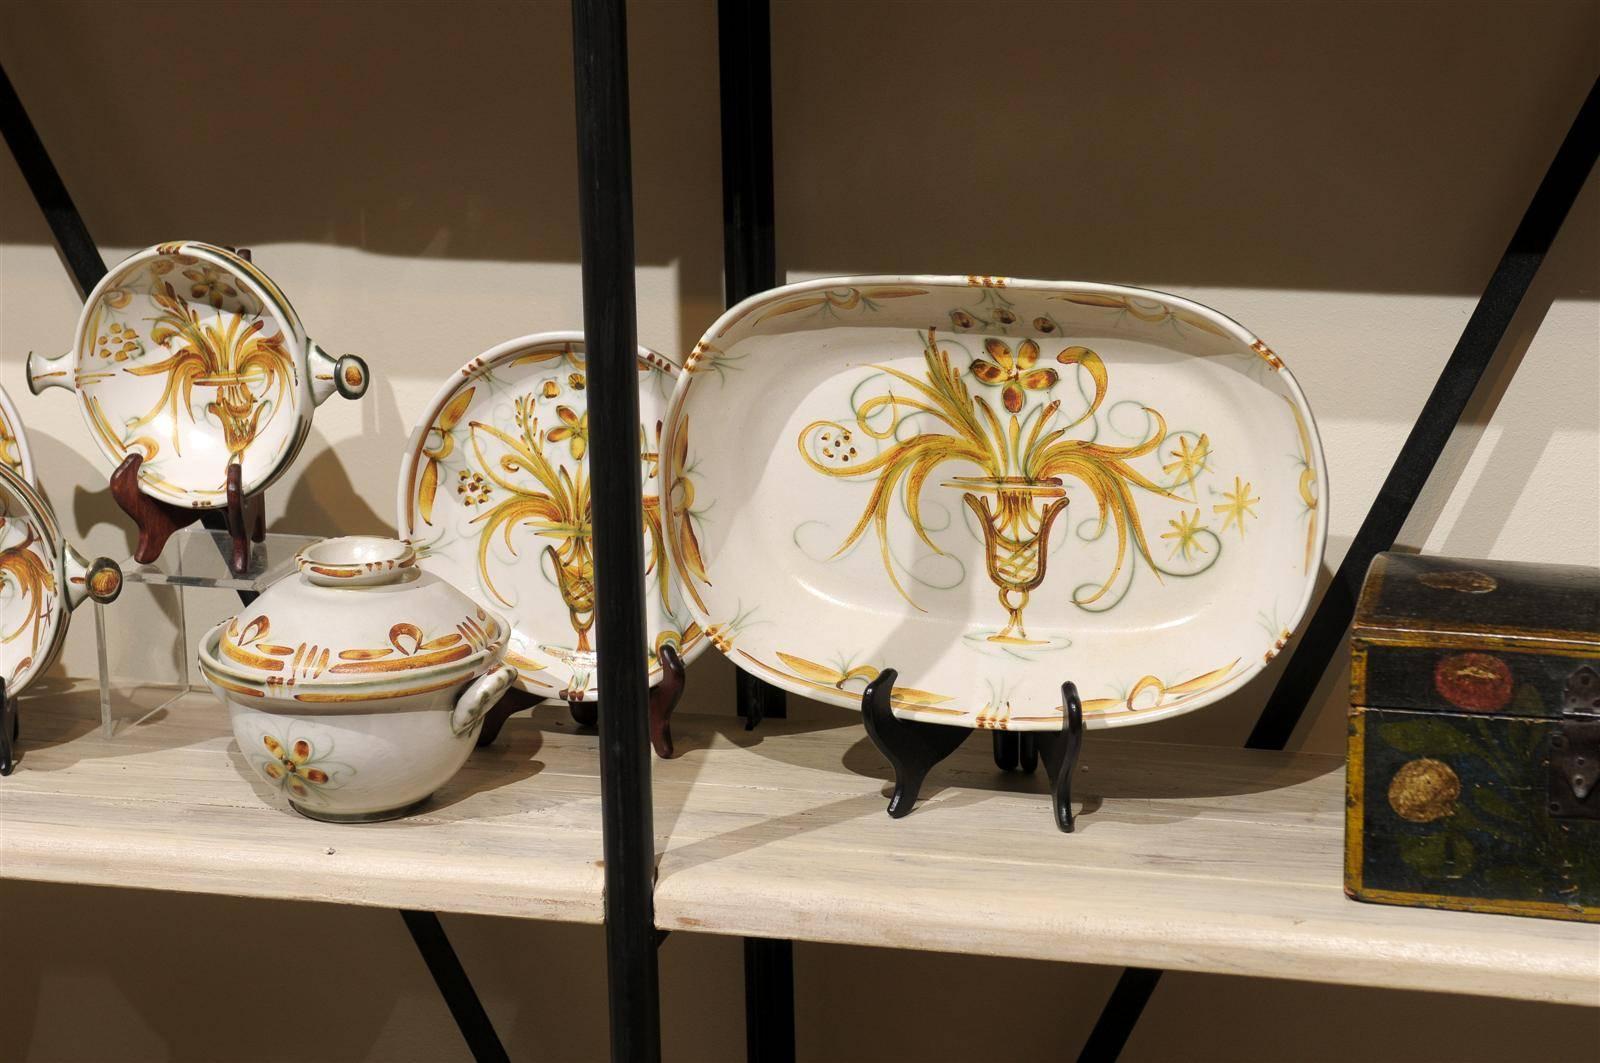 Pottery Set of Midcentury Quimper Tableware in a Gold and Green Pattern, circa 1970 For Sale